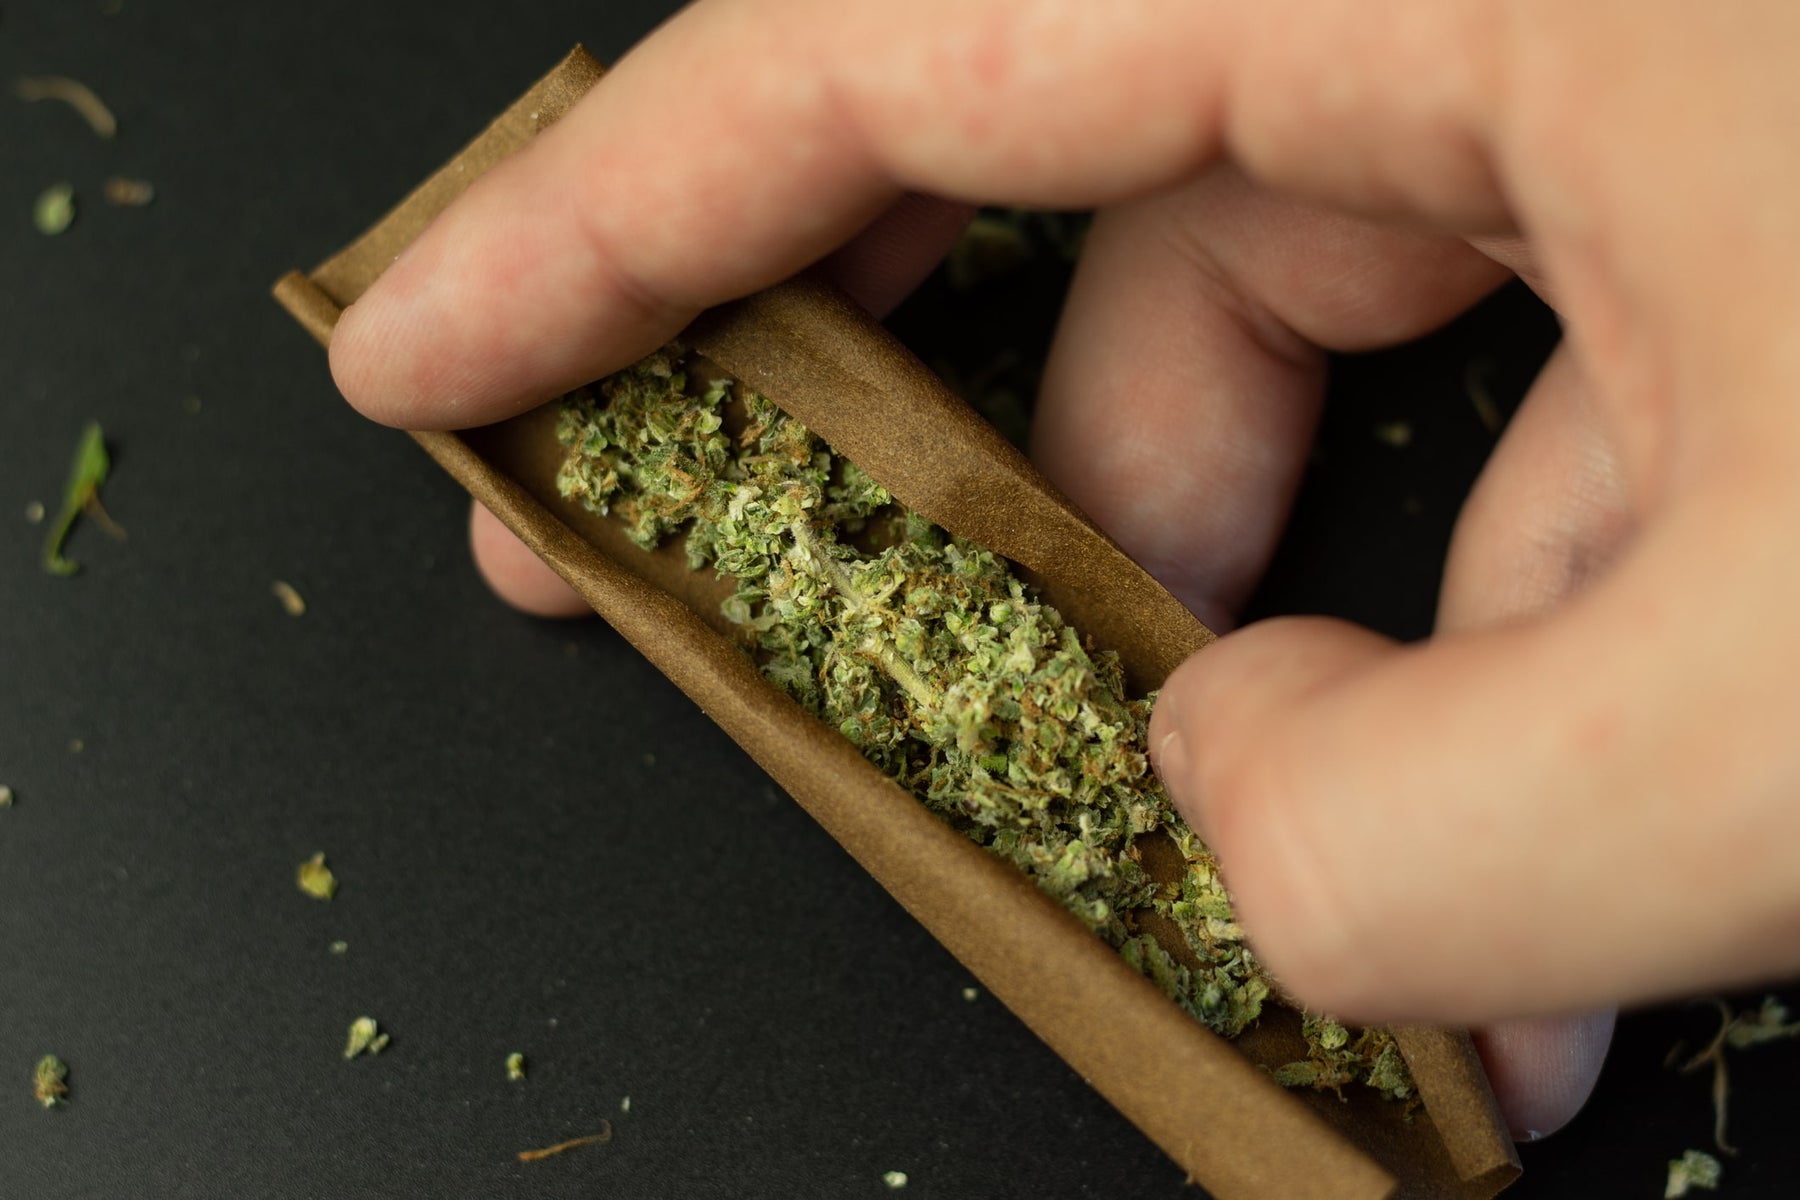 How to Roll a Hemp Cone: Step-by-Step Guide